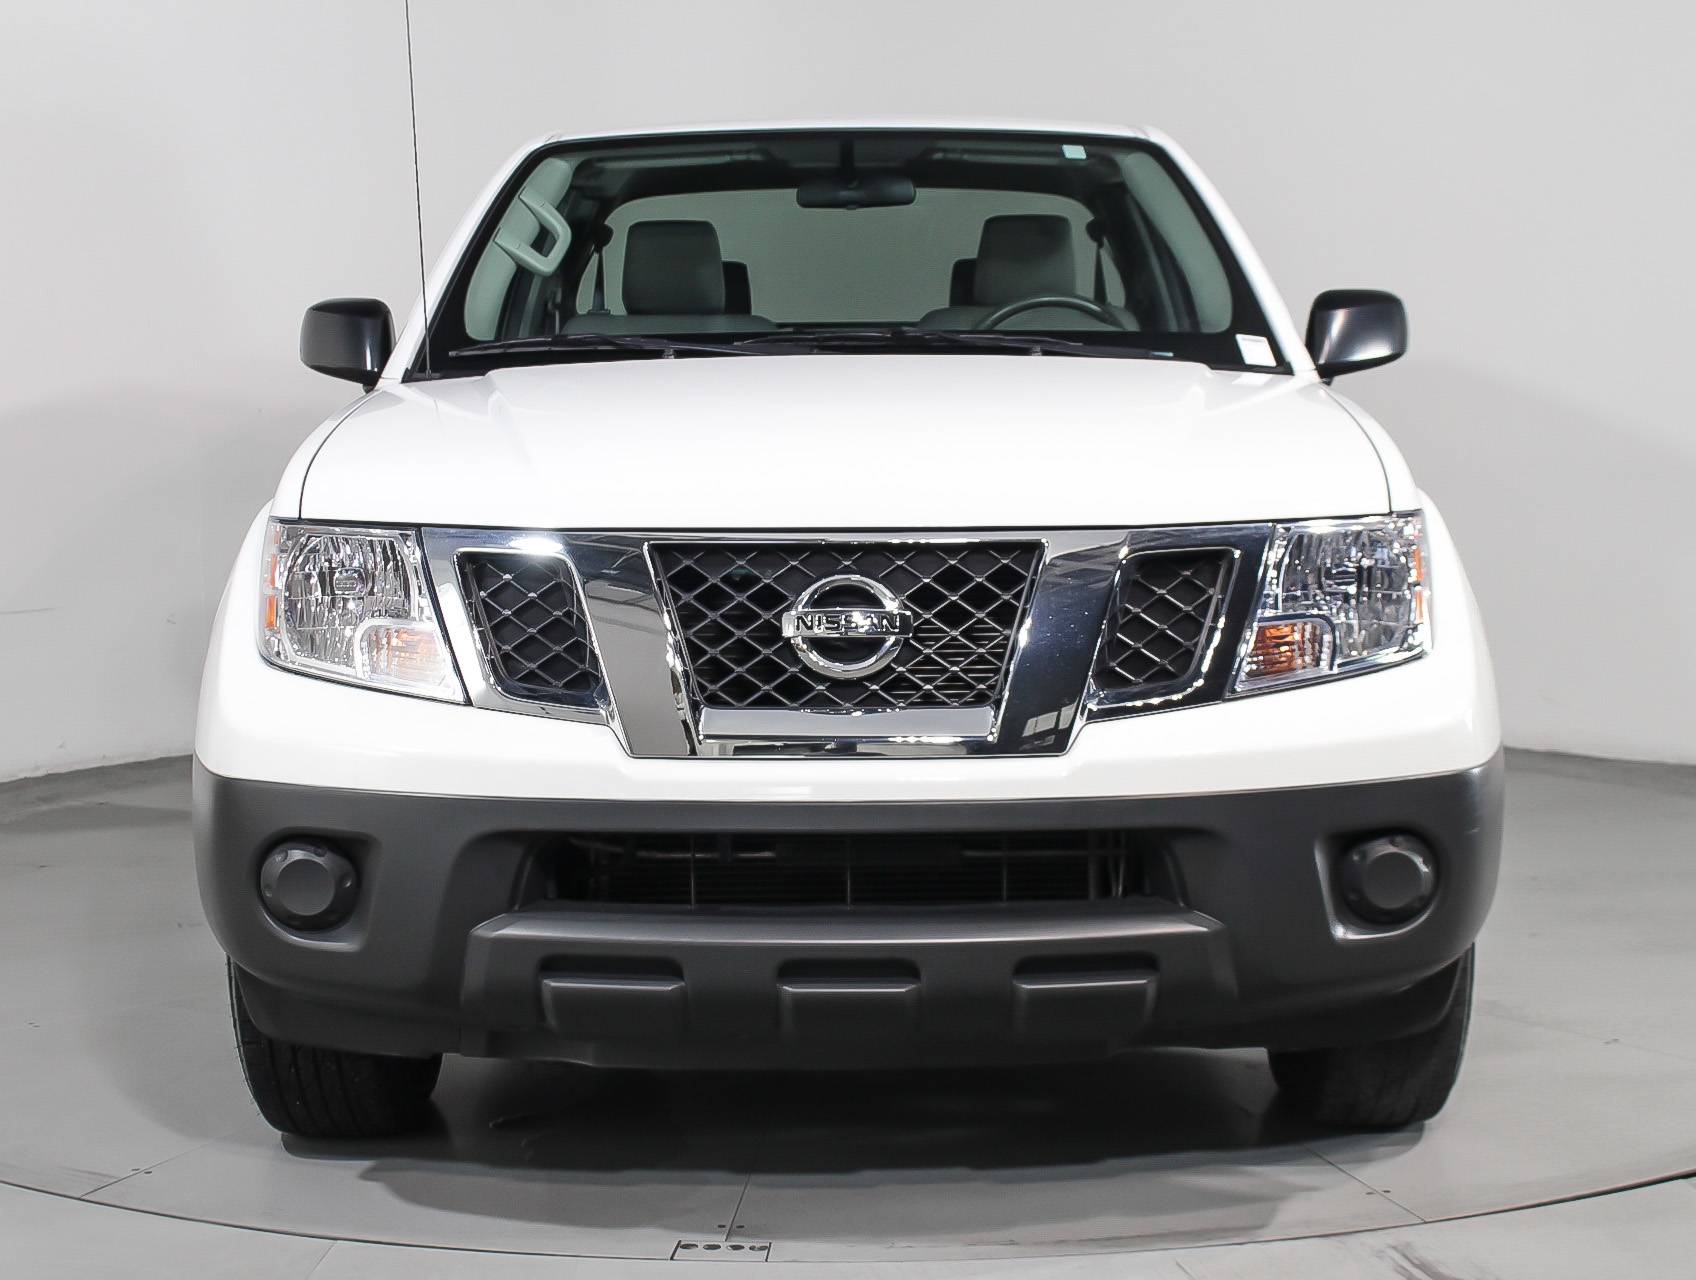 Florida Fine Cars - Used NISSAN FRONTIER 2017 MARGATE King Cab S